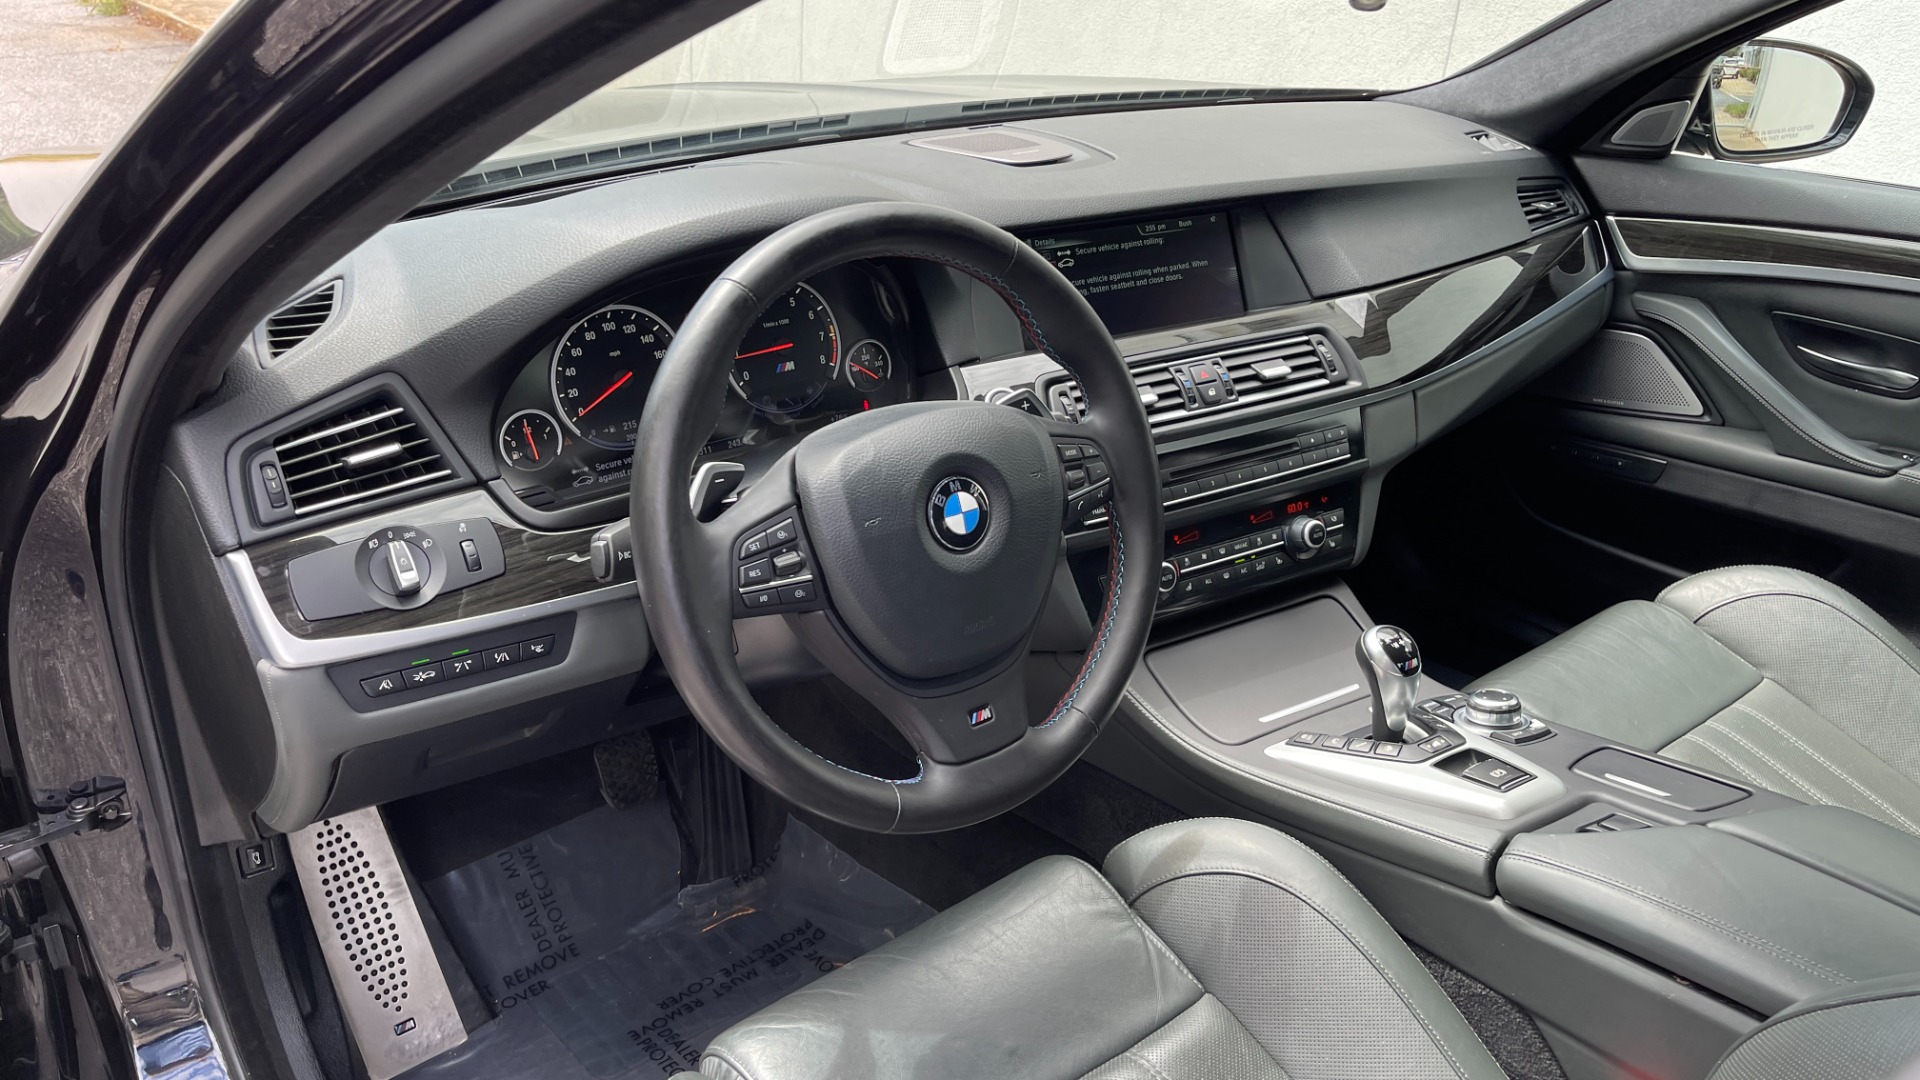 Used 2013 BMW M5 EXECUTIVE PKG / DRVR ASST / NAV / SUNROOF / REARVIEW for sale Sold at Formula Imports in Charlotte NC 28227 6